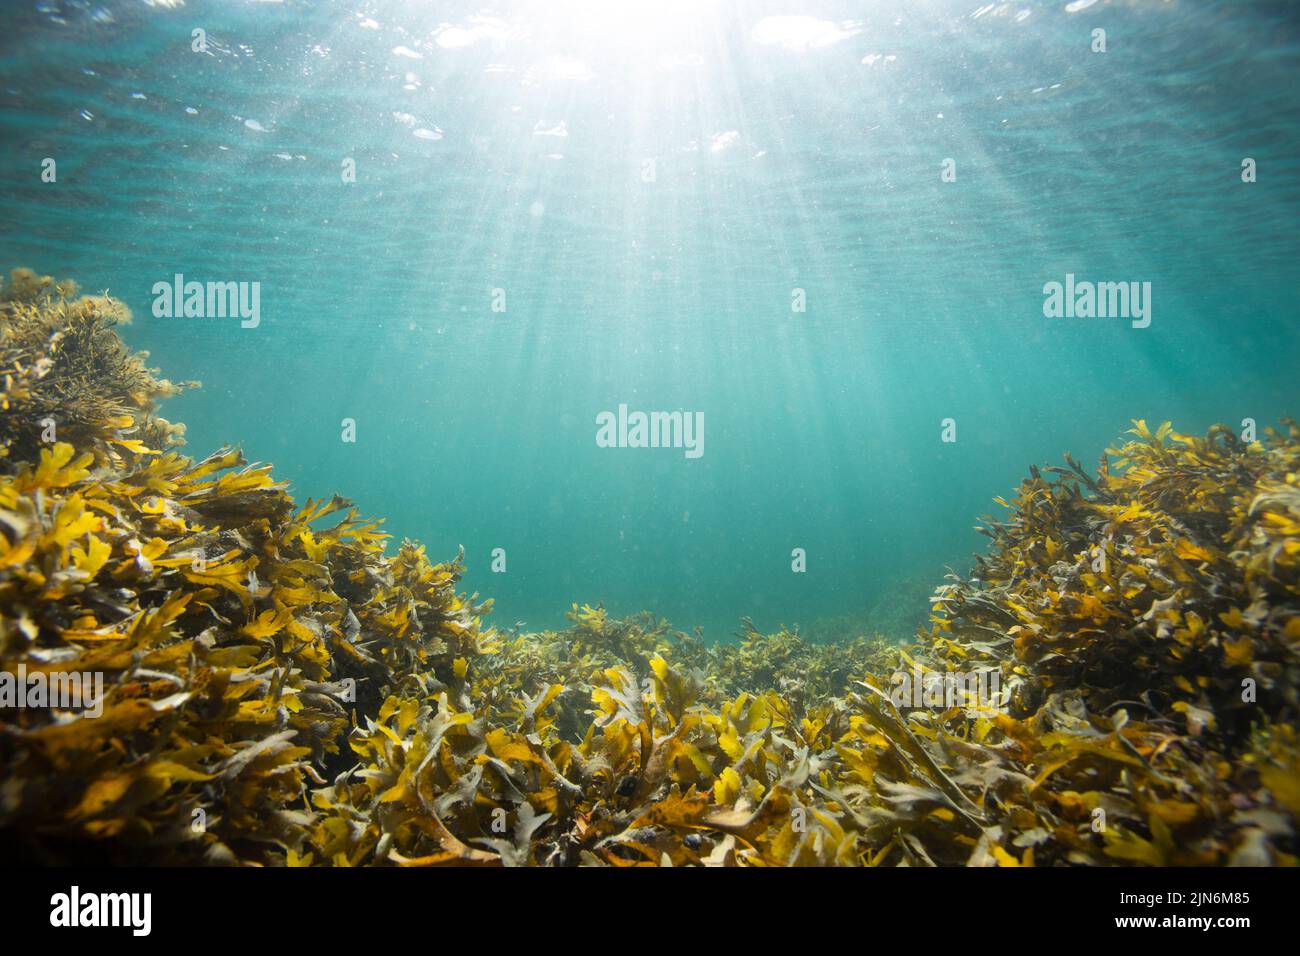 Underwater view of kelp with sun rays and blue water. Stock Photo